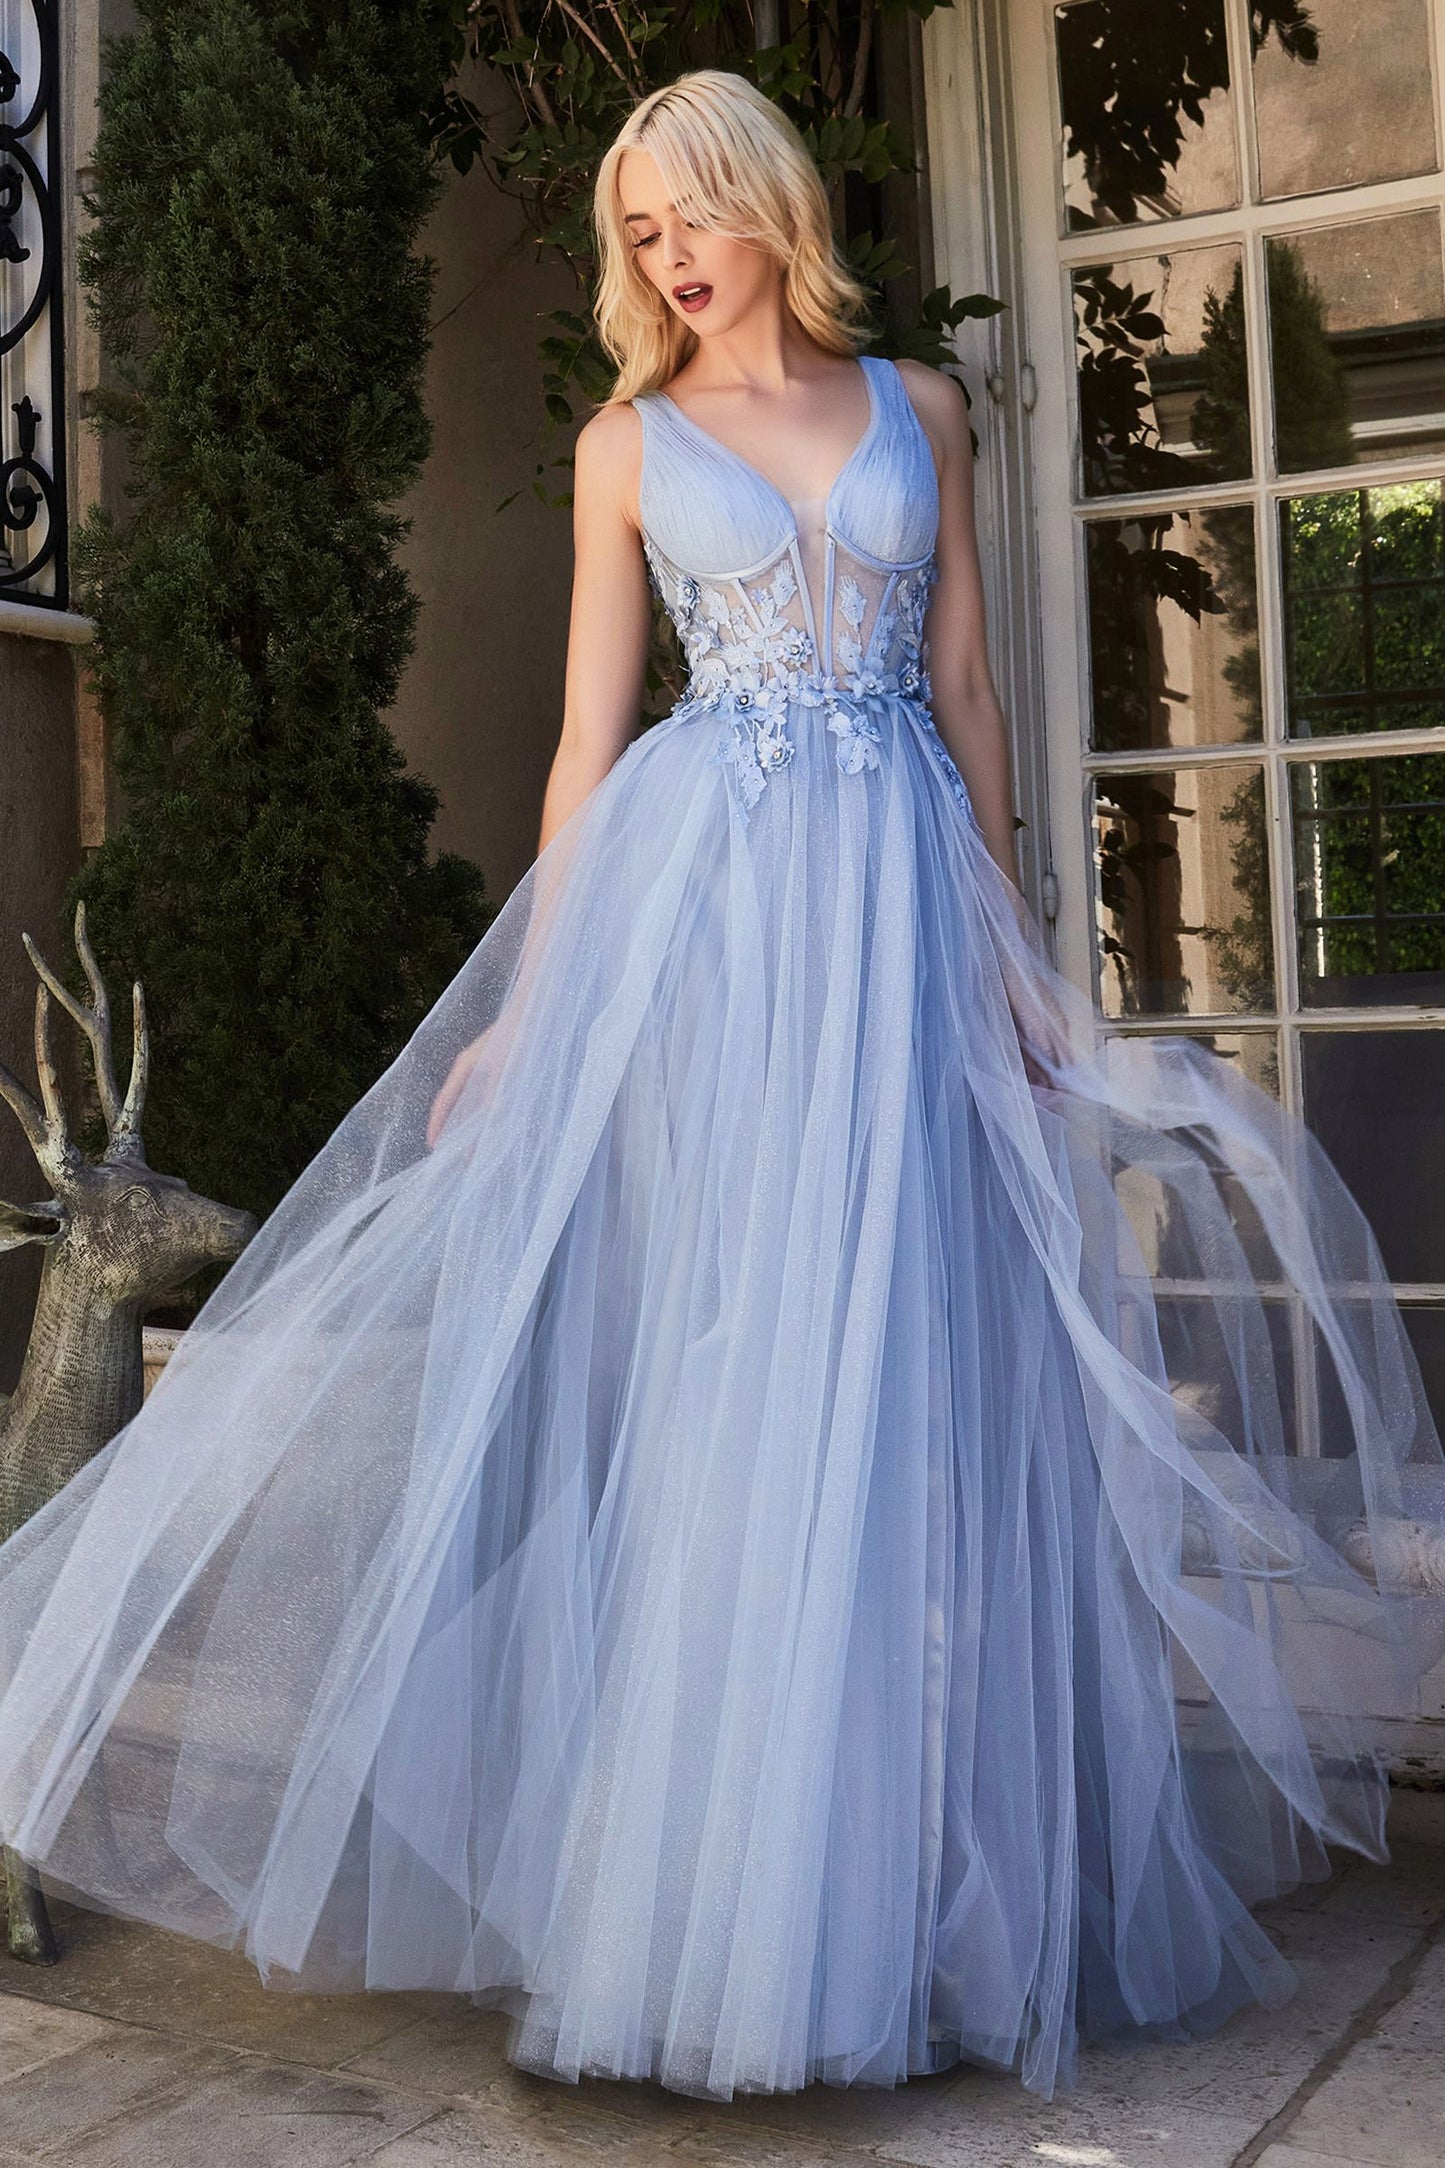 Andrea Leo - Megara Tulle Flower Detailed Evening Gown  Style #A1057